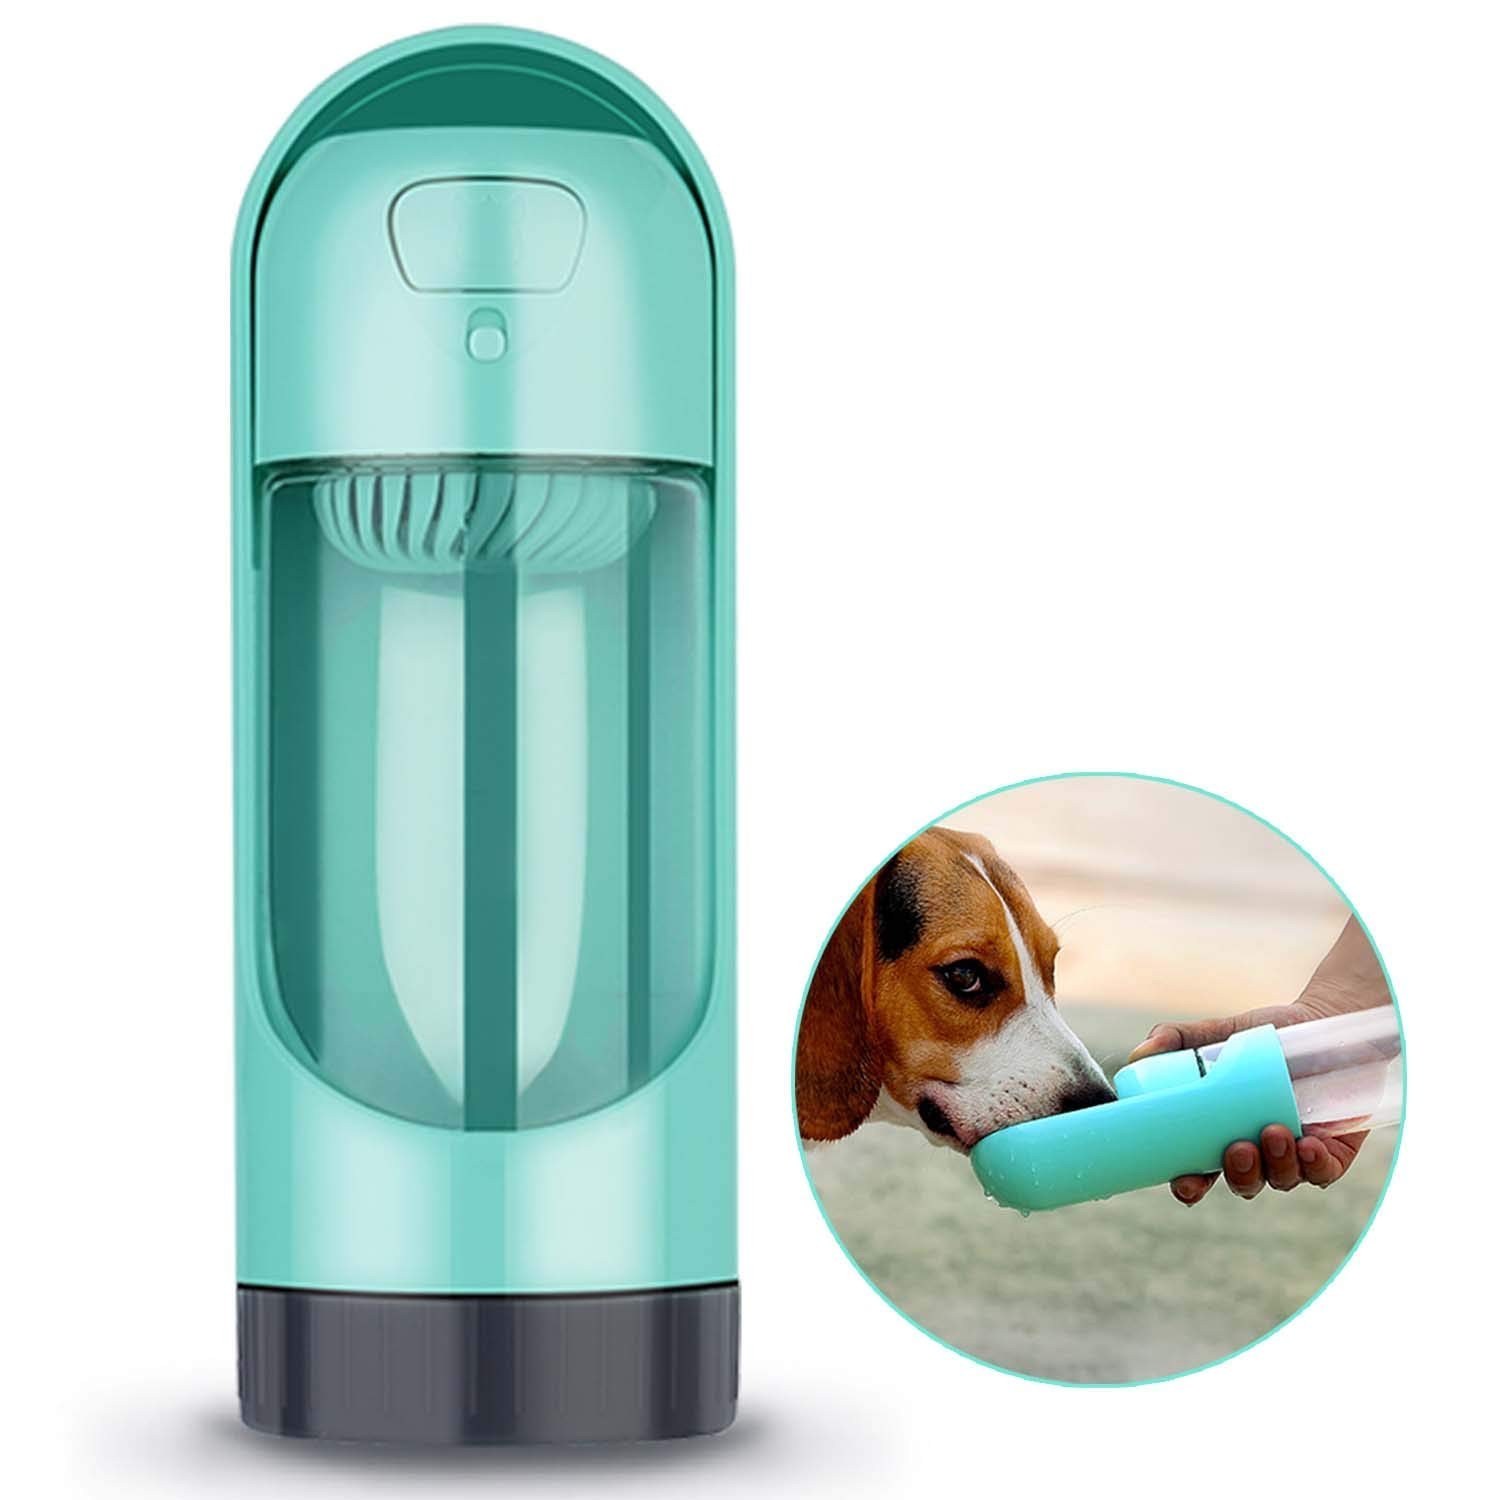 Portable Pet Dog Water Bottle Dispenser Travel Dog Bowl Cups Dogs Cats Feeding Water Outdoor Walking For Puppy Cat Pets Products